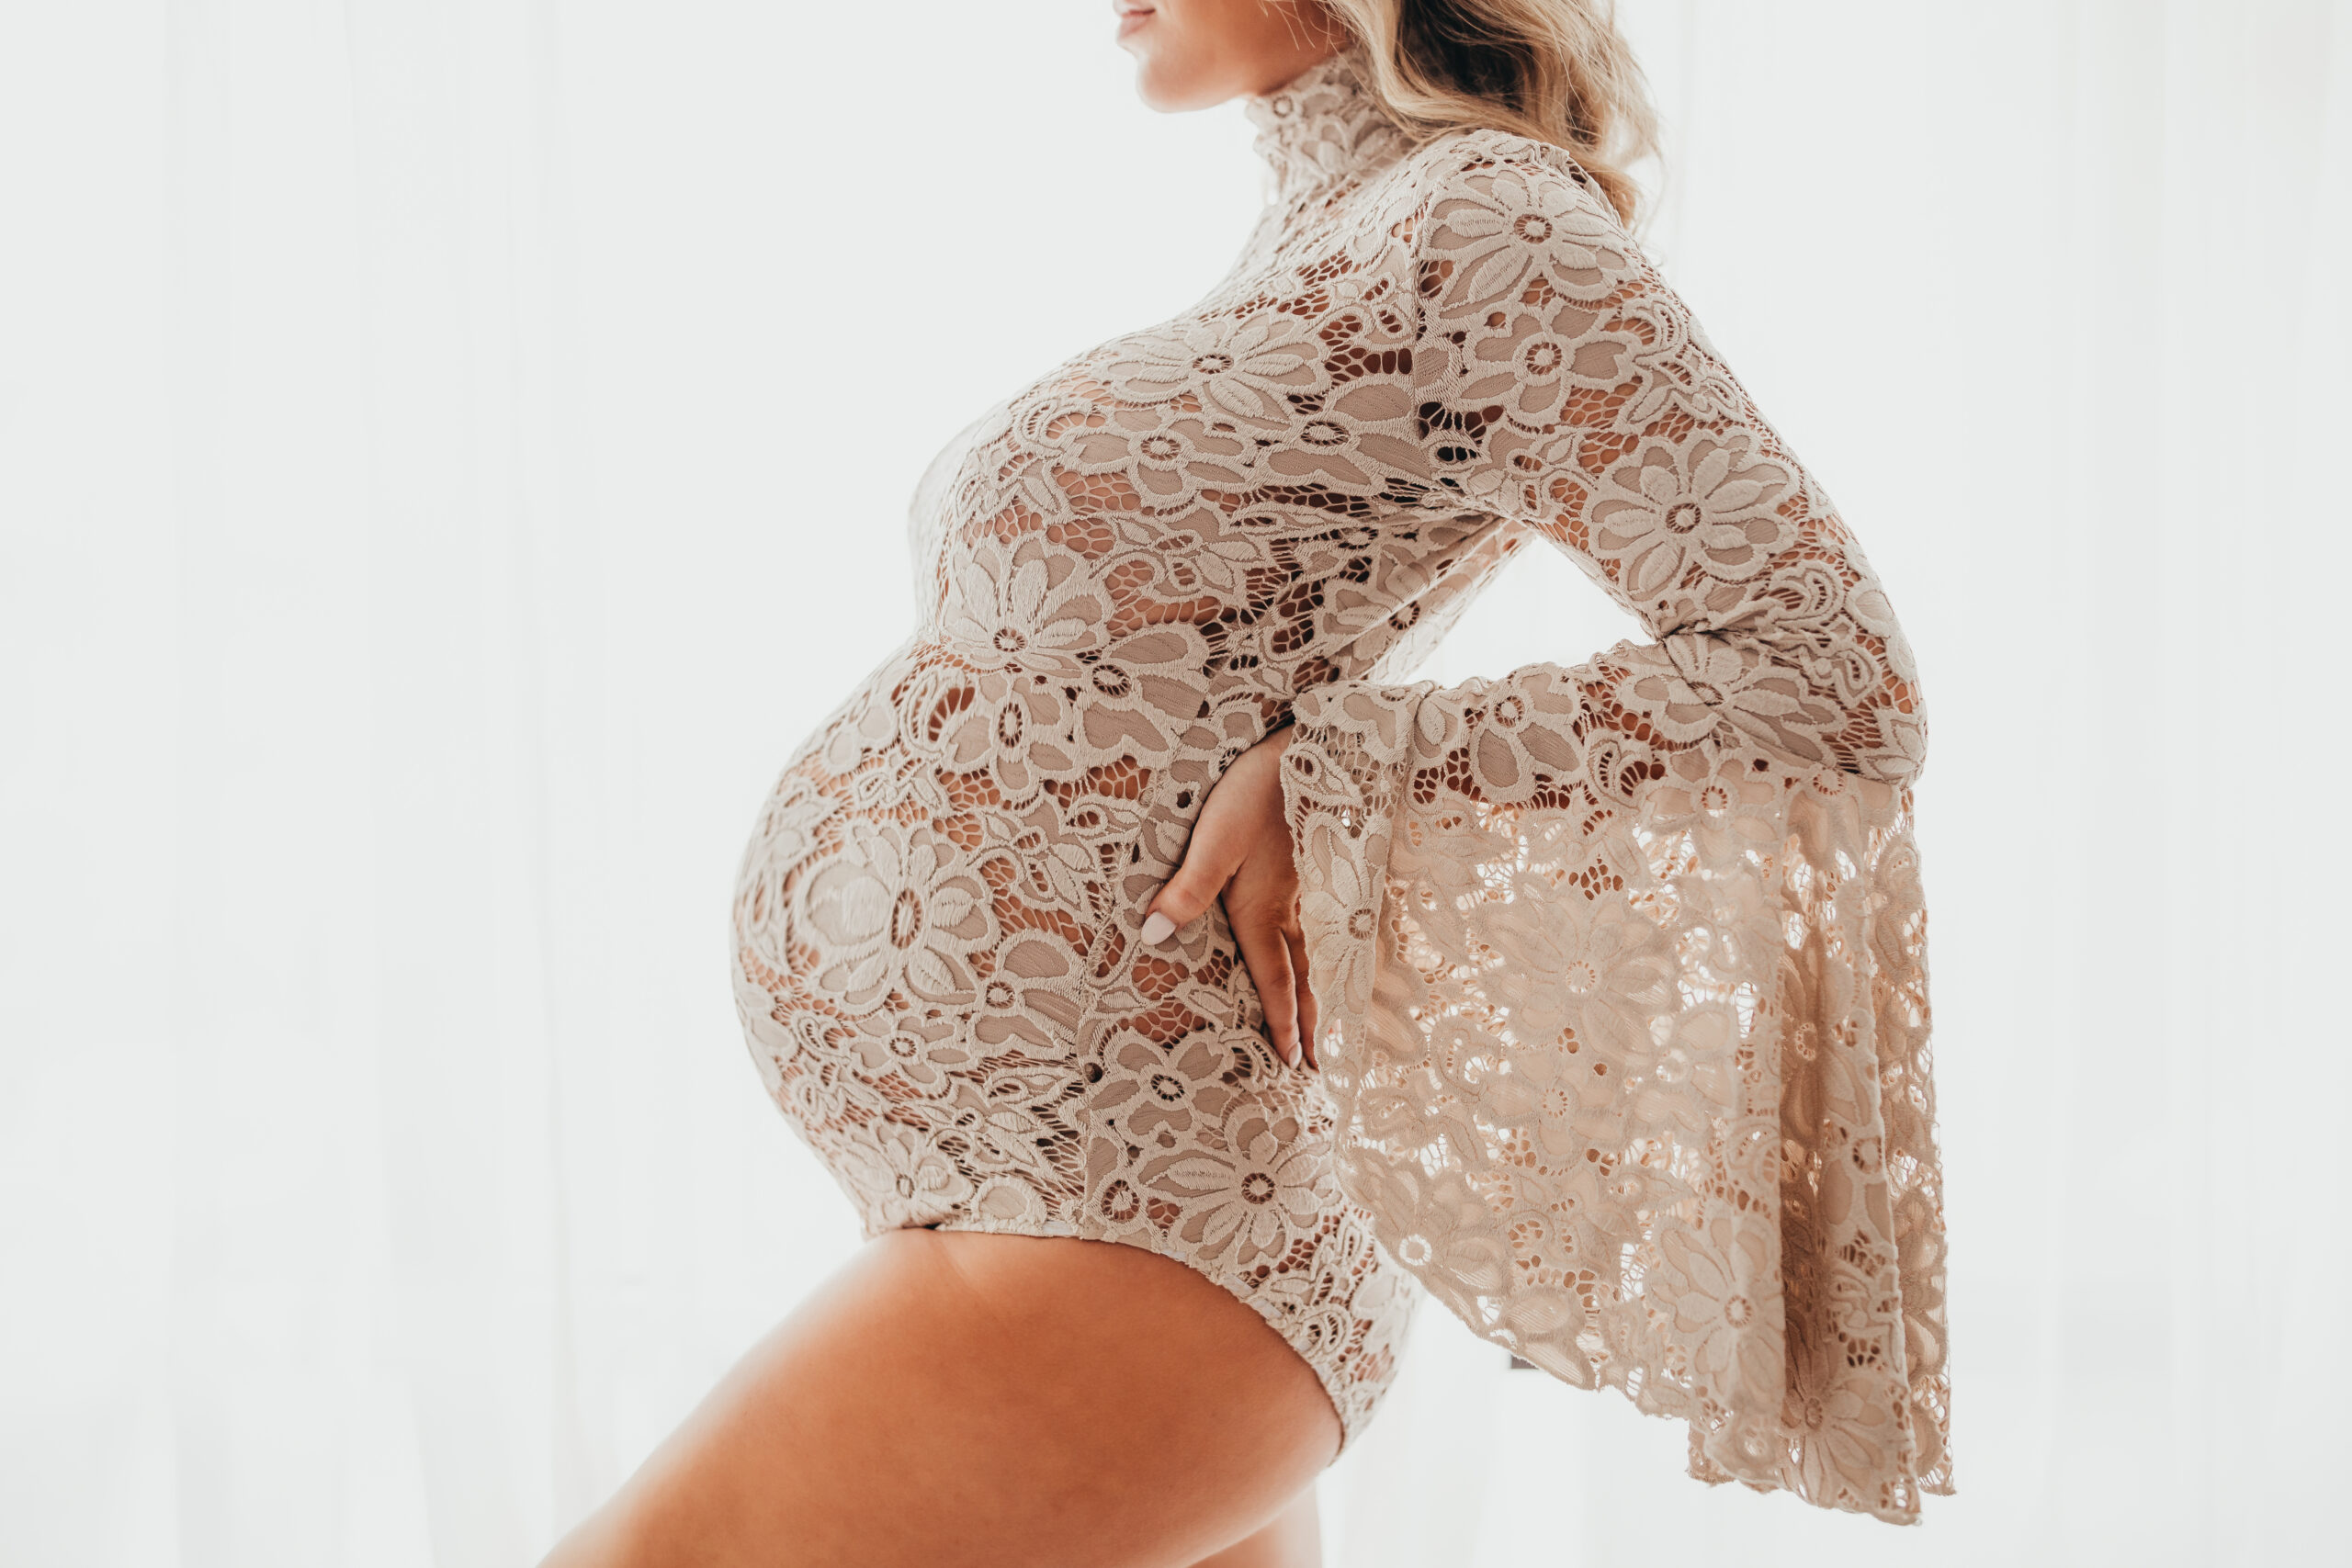 Expectant mama wearing a boho bodysuit similar to styles found in many Houston Maternity Stores.